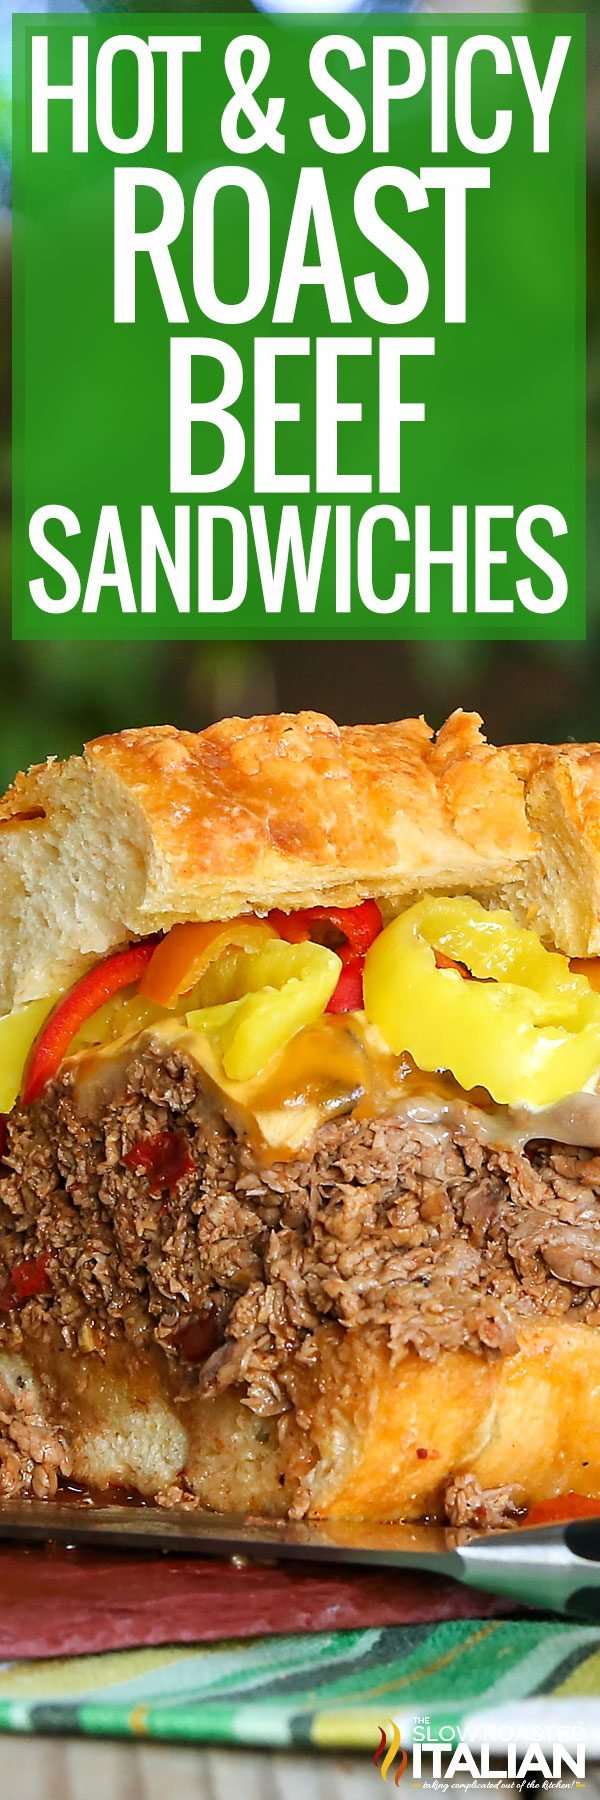 hot and spicy roast beef sandwiches -pin